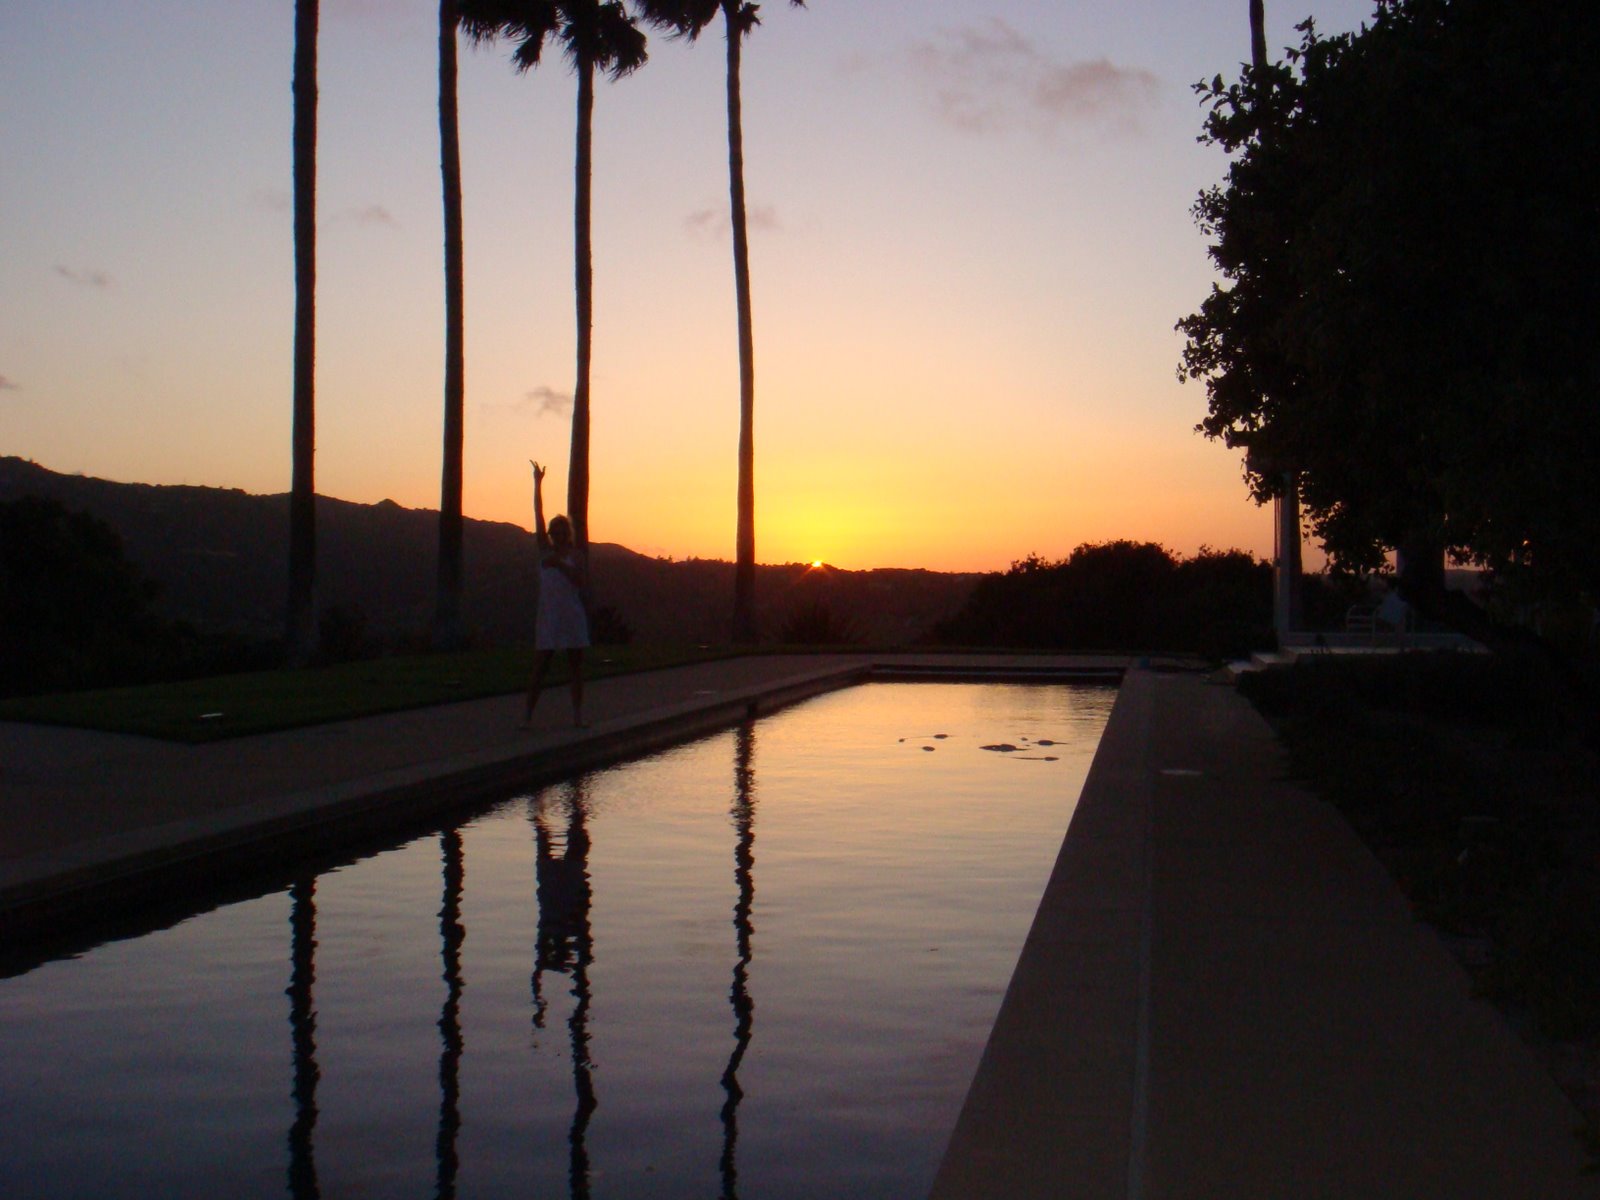 [Me+by+the+lap+pool+at+sunset+at+the+mansion+in+Monterey+-+CA.JPG]